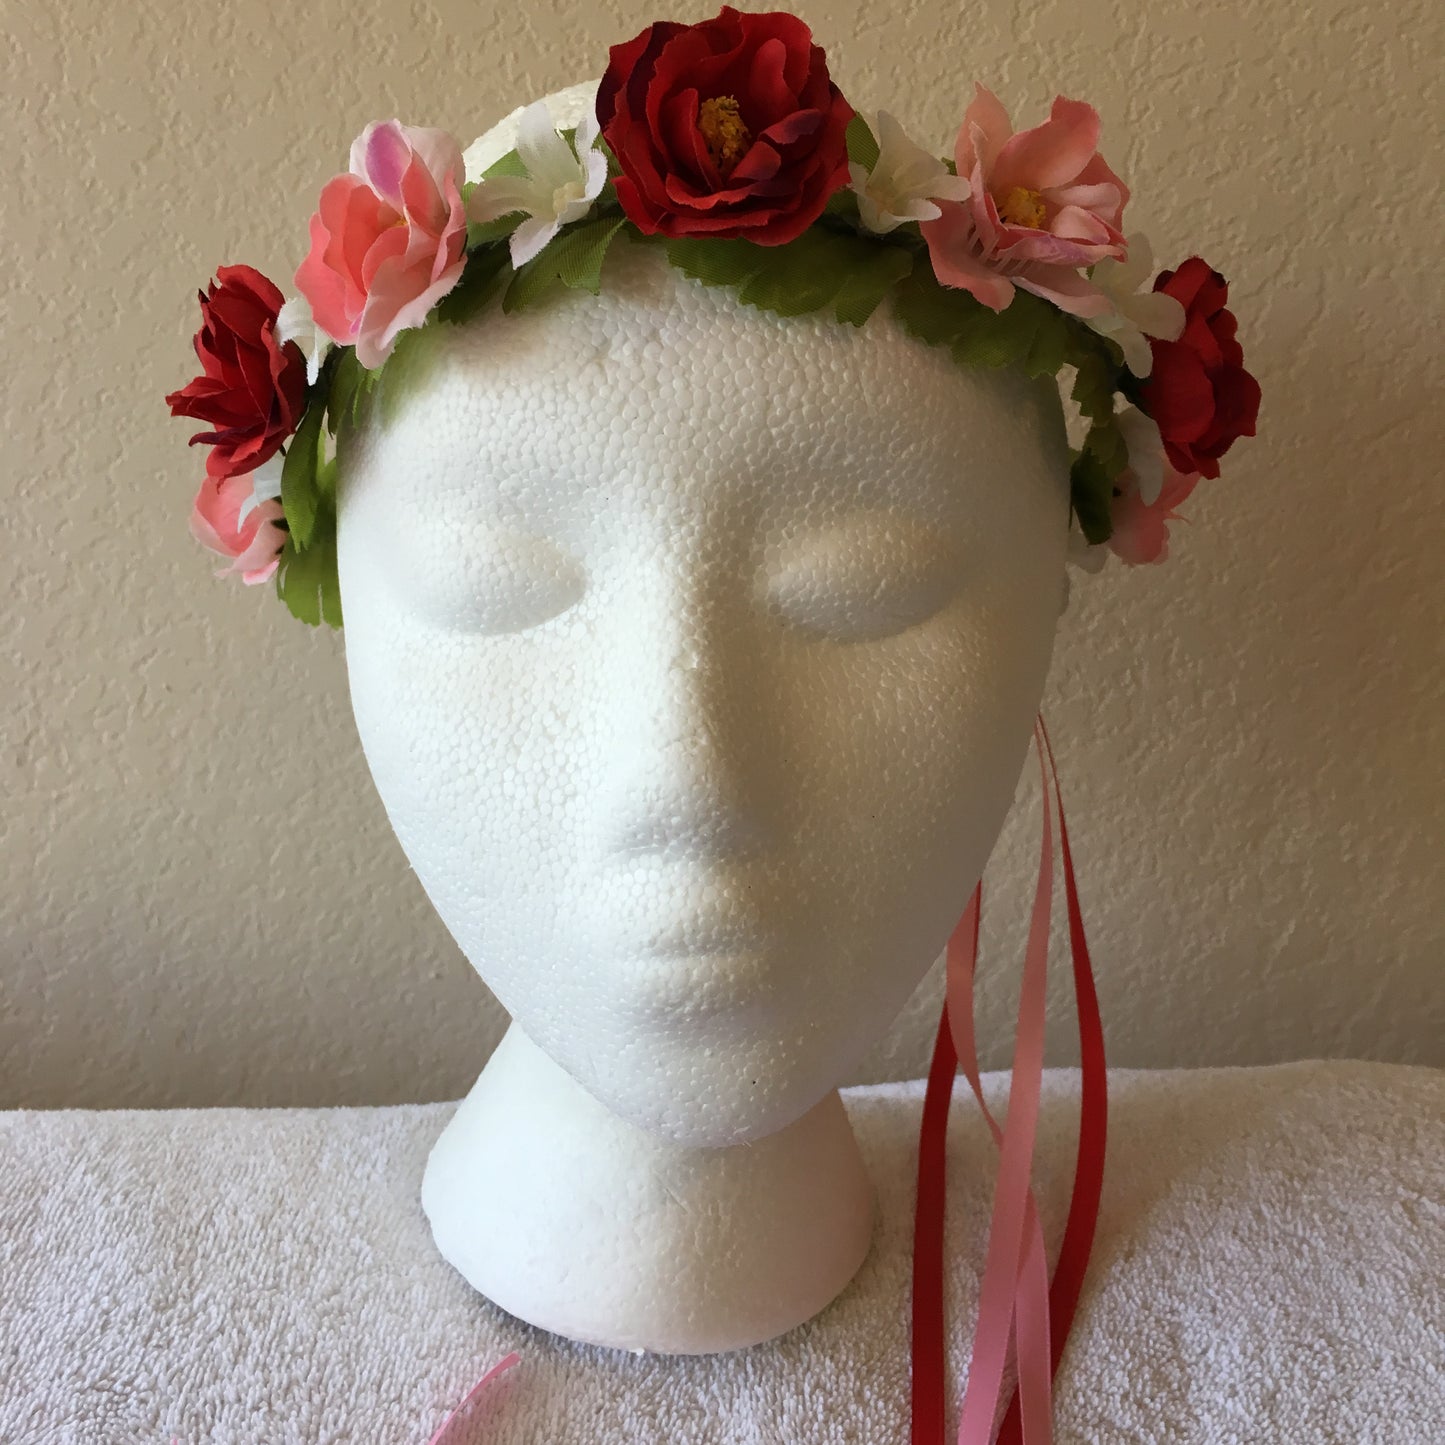 Extra Small Wreath - Pink & Red roses w/ small white flowers +